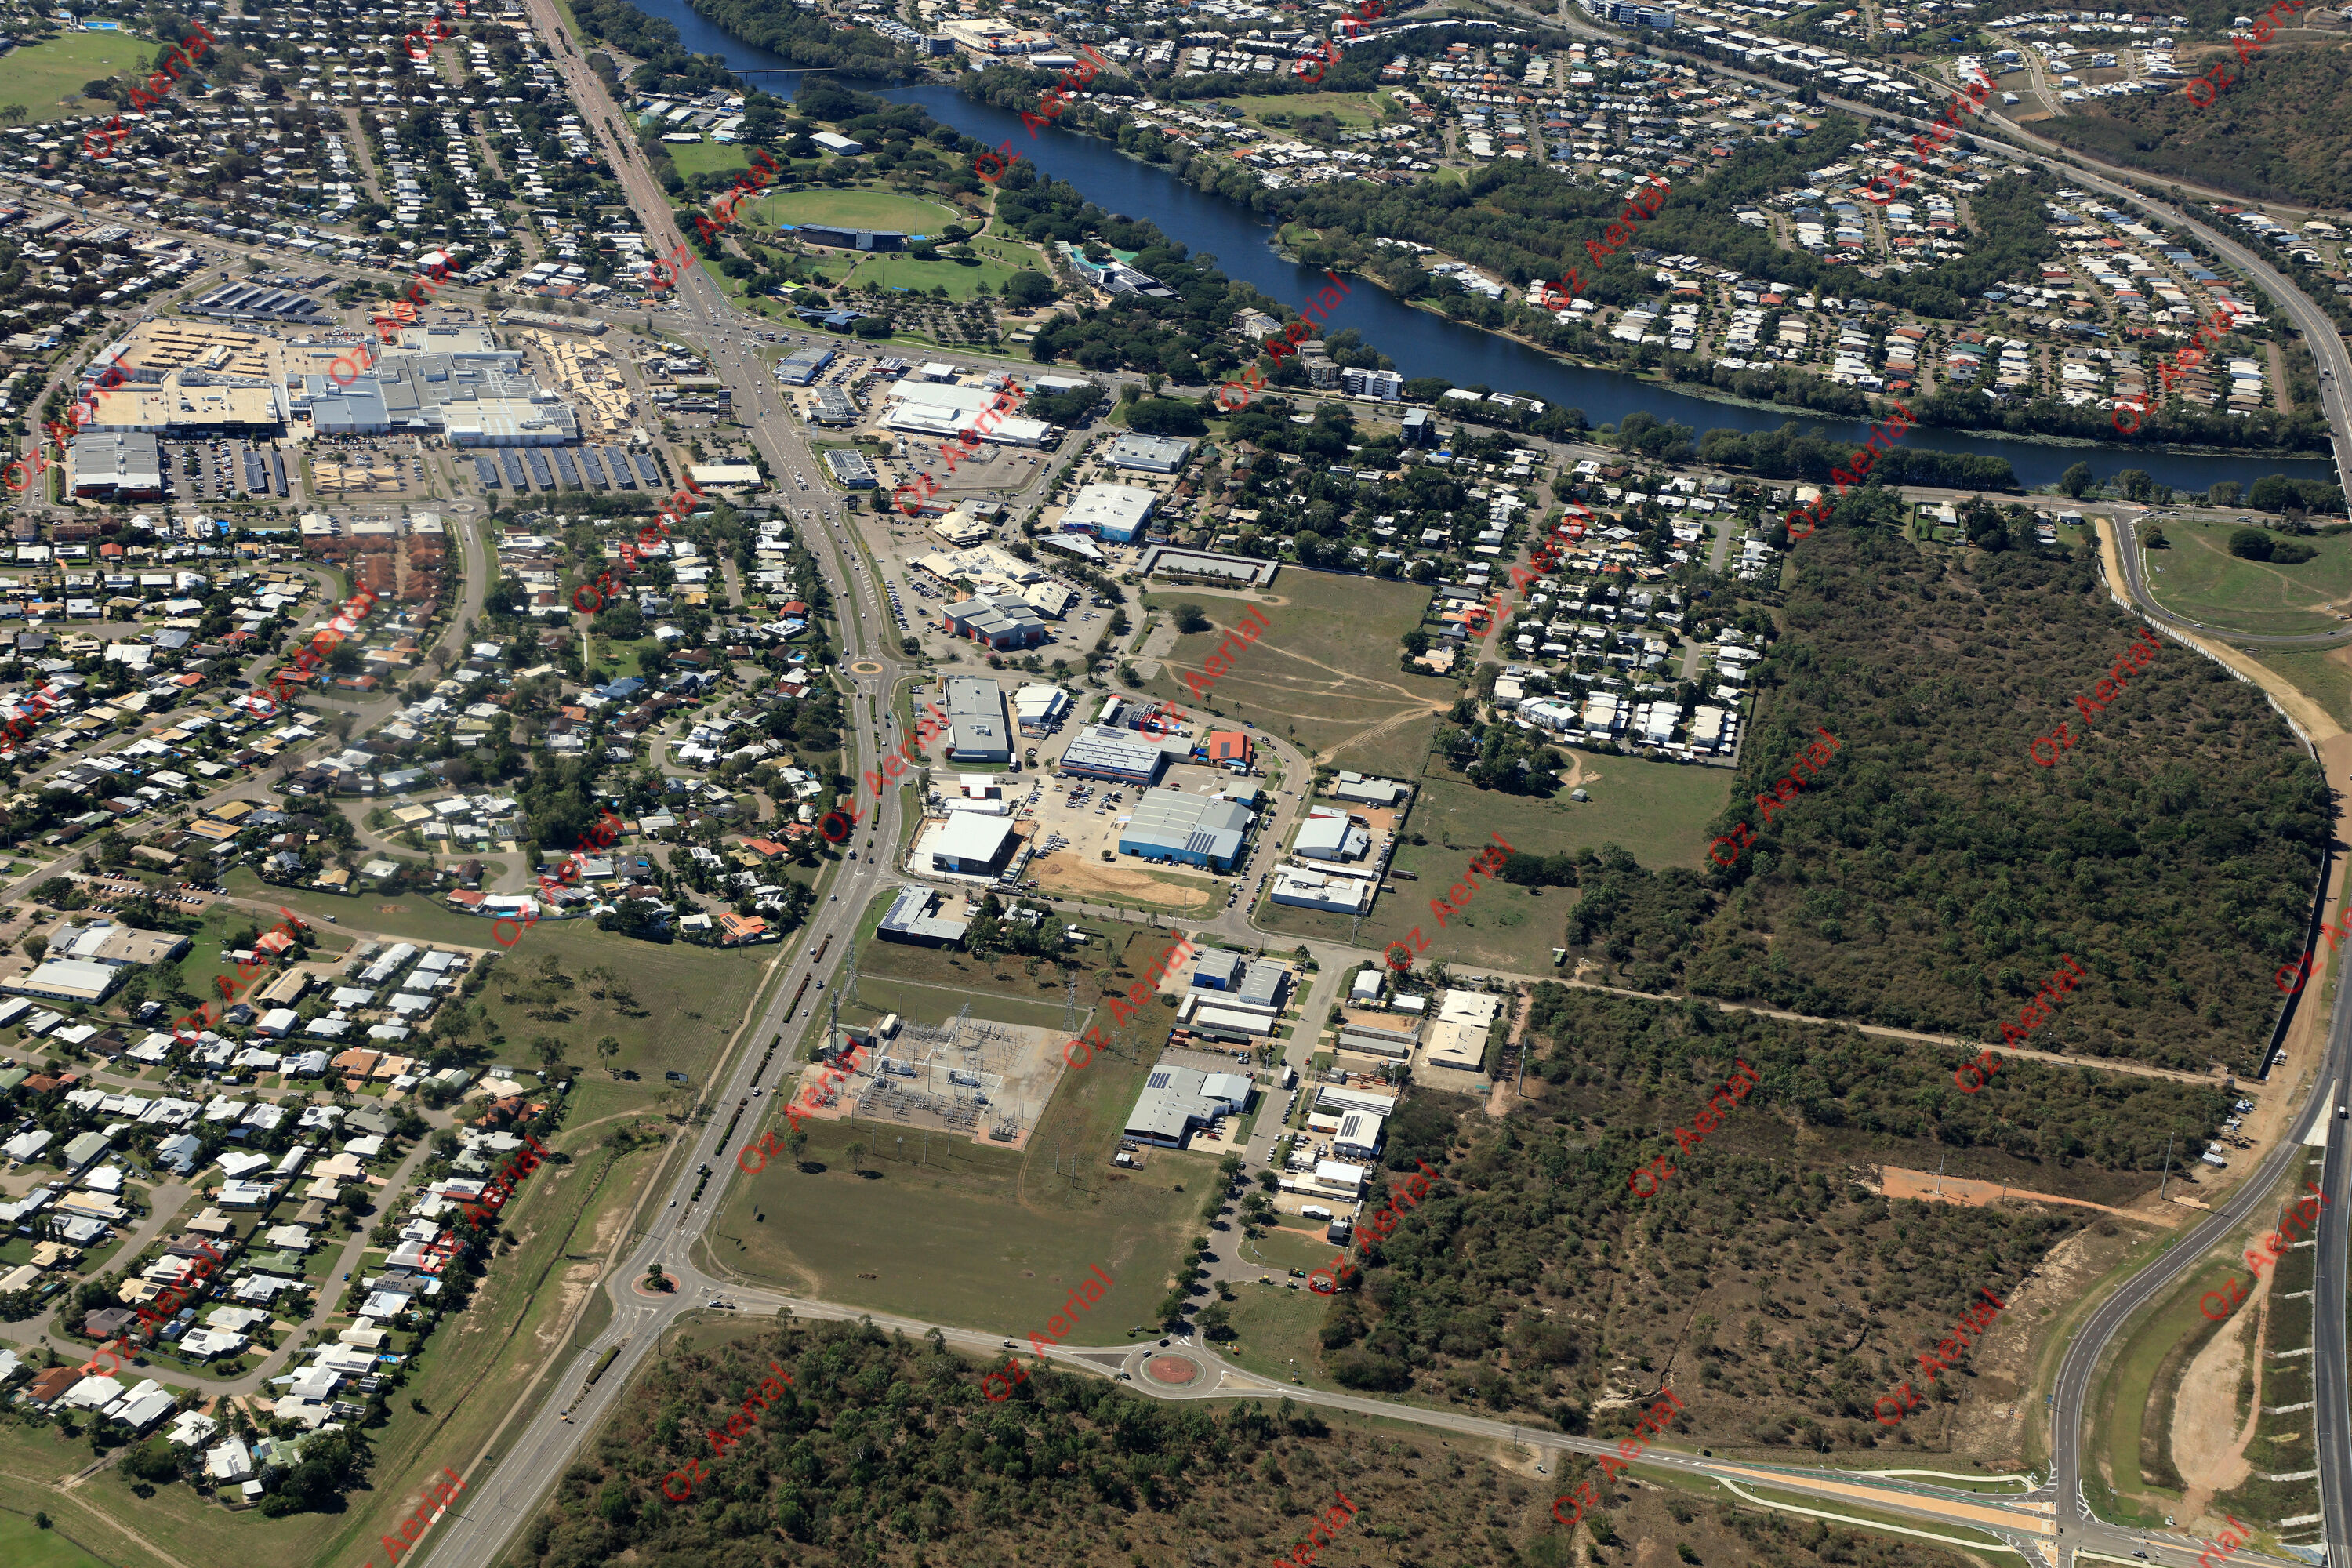 Thuringowa Central  –  64c1ed85a6cfd_IMGL3695.JPG